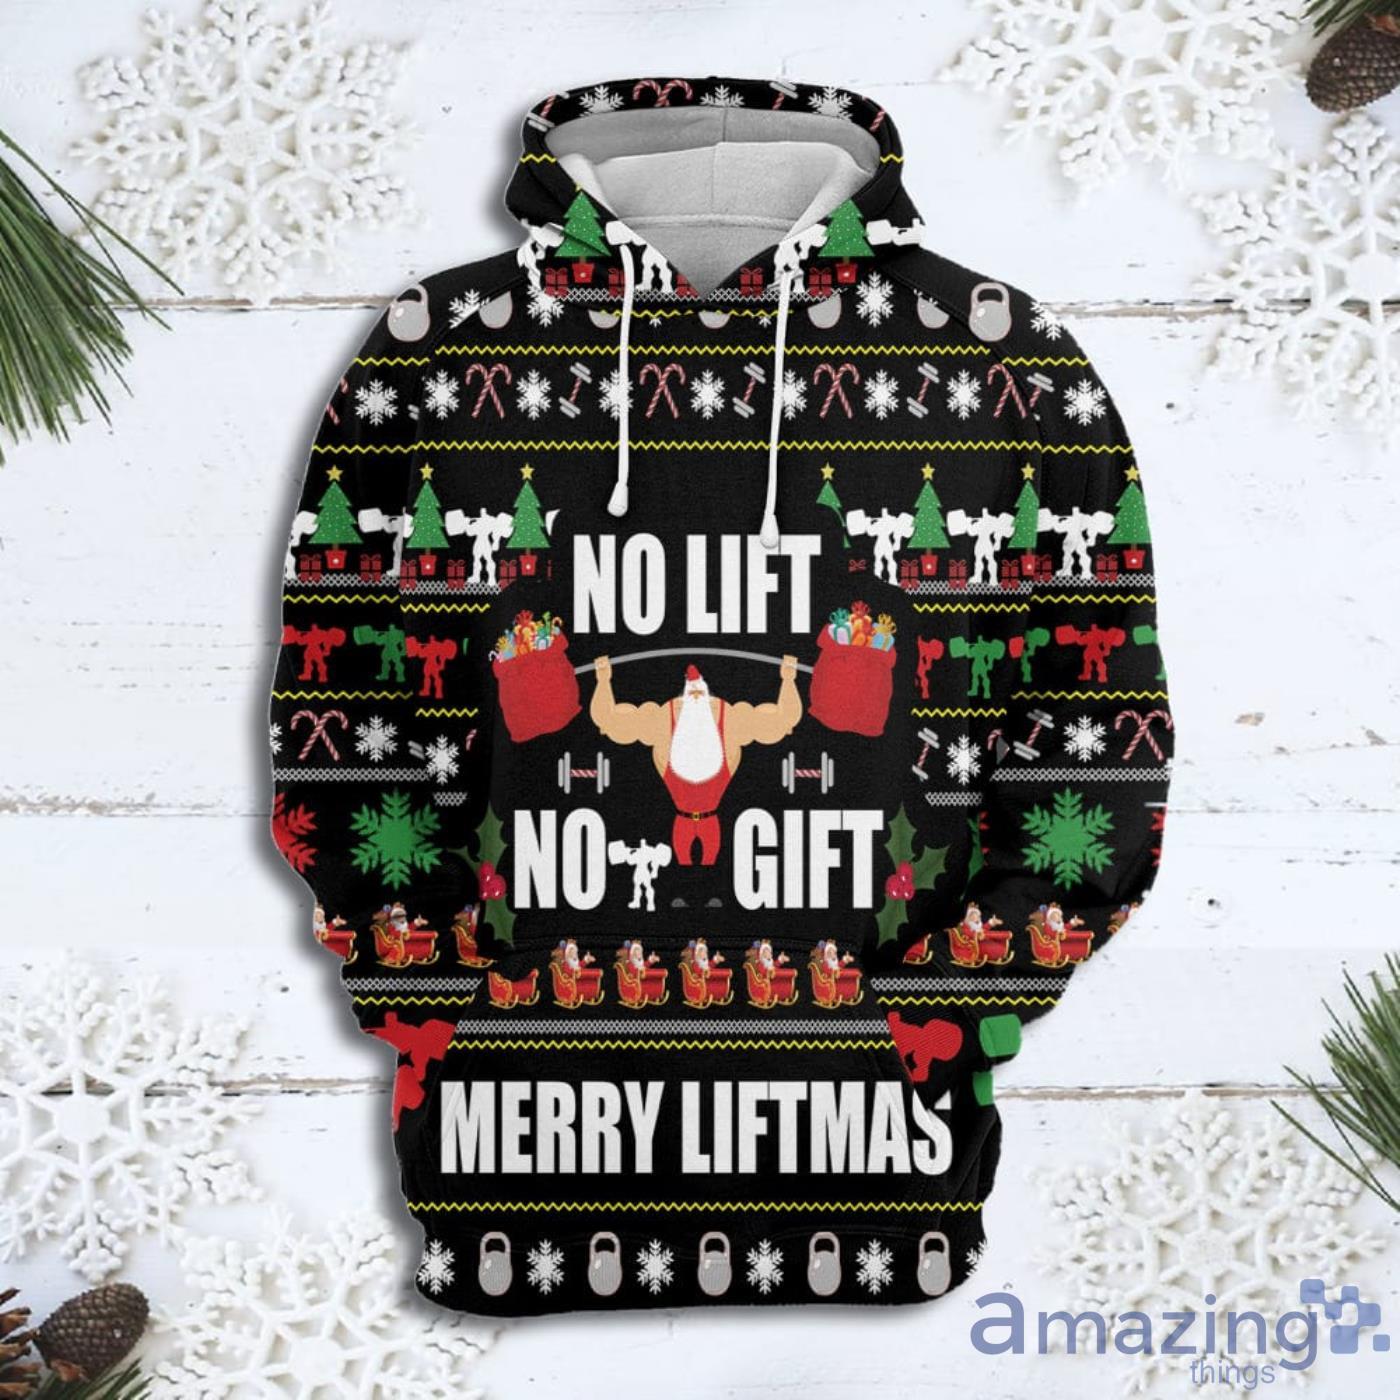 https://image.whatamazingthings.com/2022/09/no-lift-no-gift-weightlifting-christmas-pattern-all-over-print-3d-sweater-hoodie.jpg